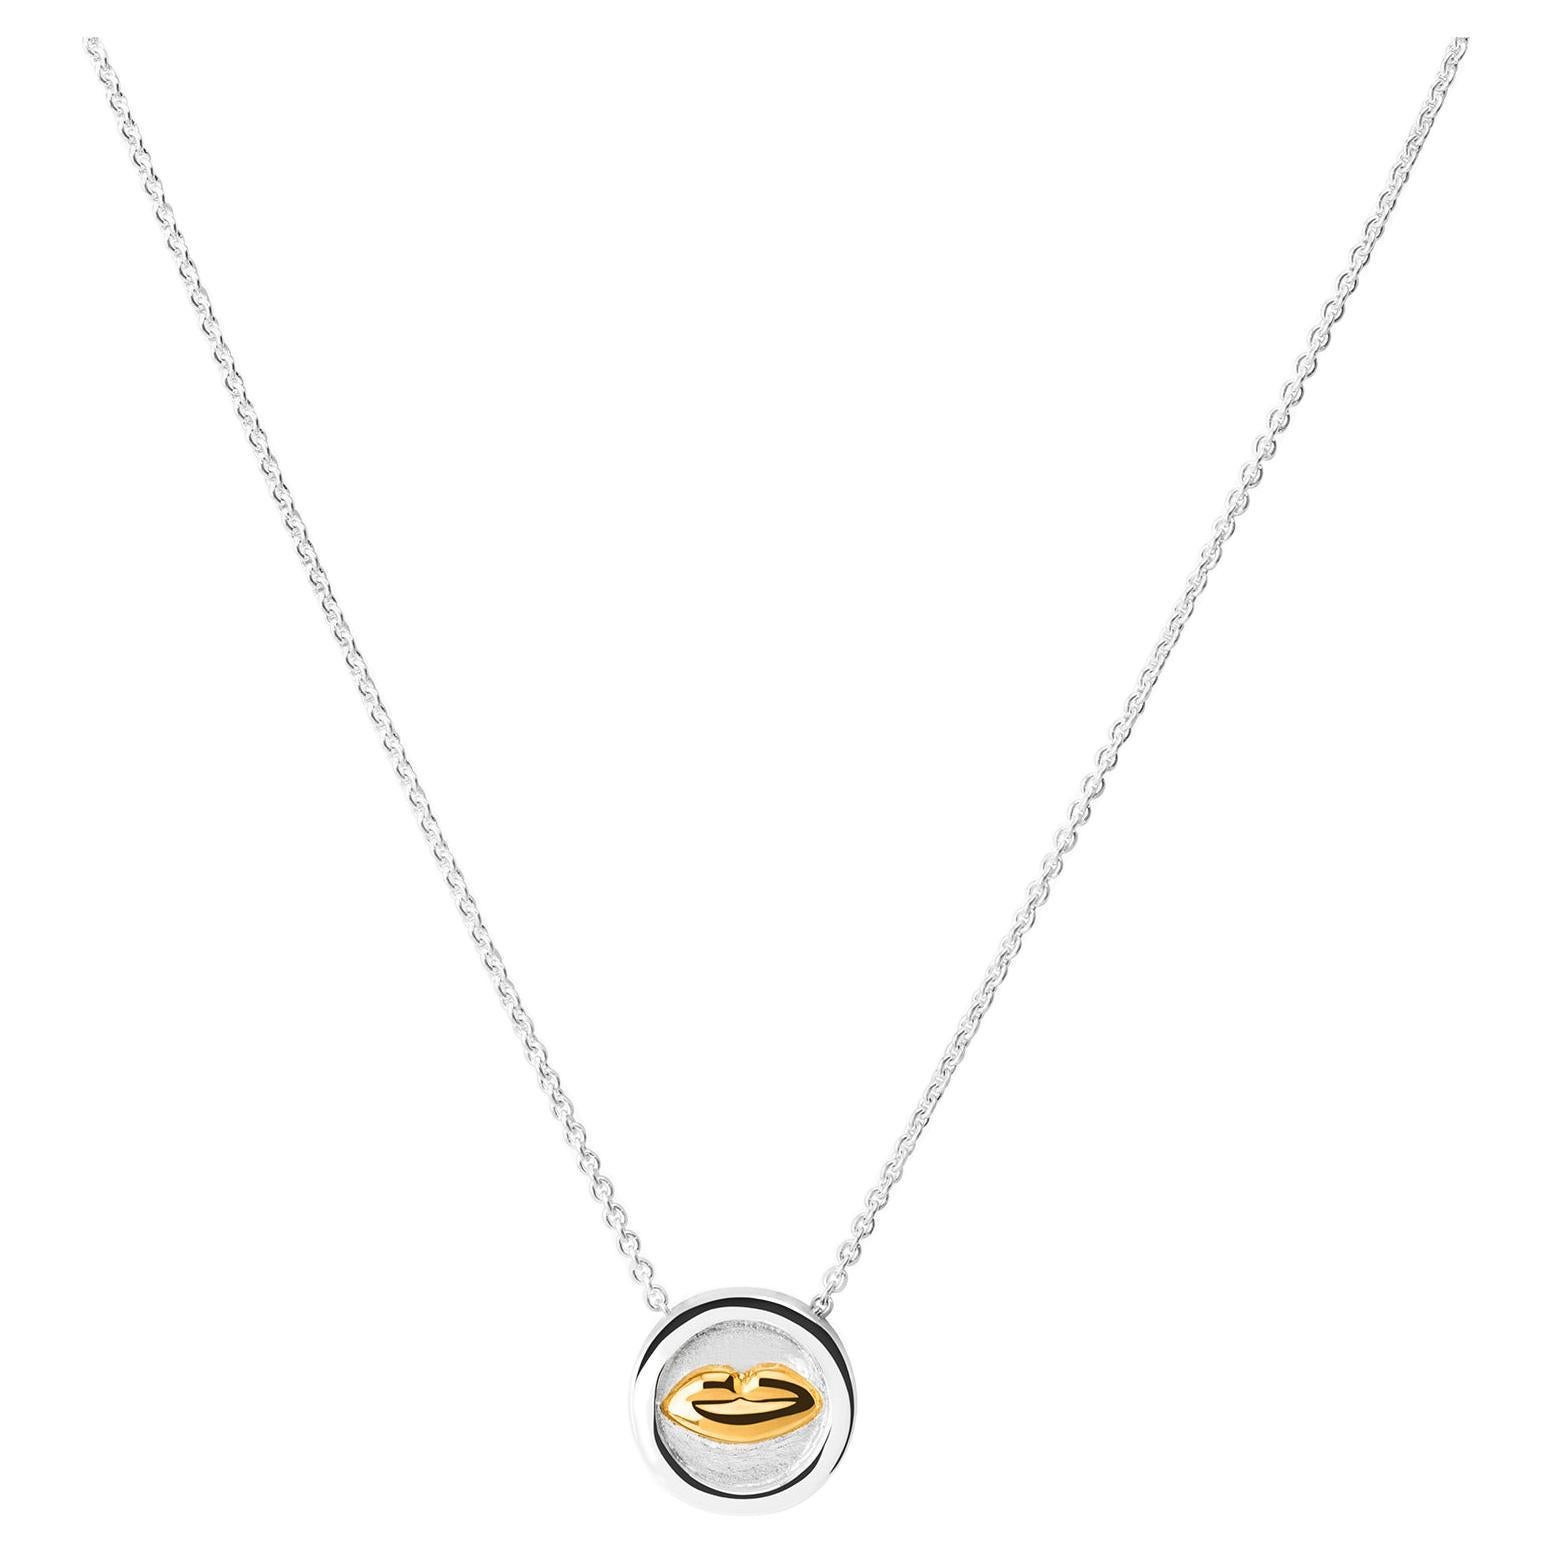 Sterling Silver With 23 Karat Yellow Gold Vermeil Bésame Medal Pendant For Sale